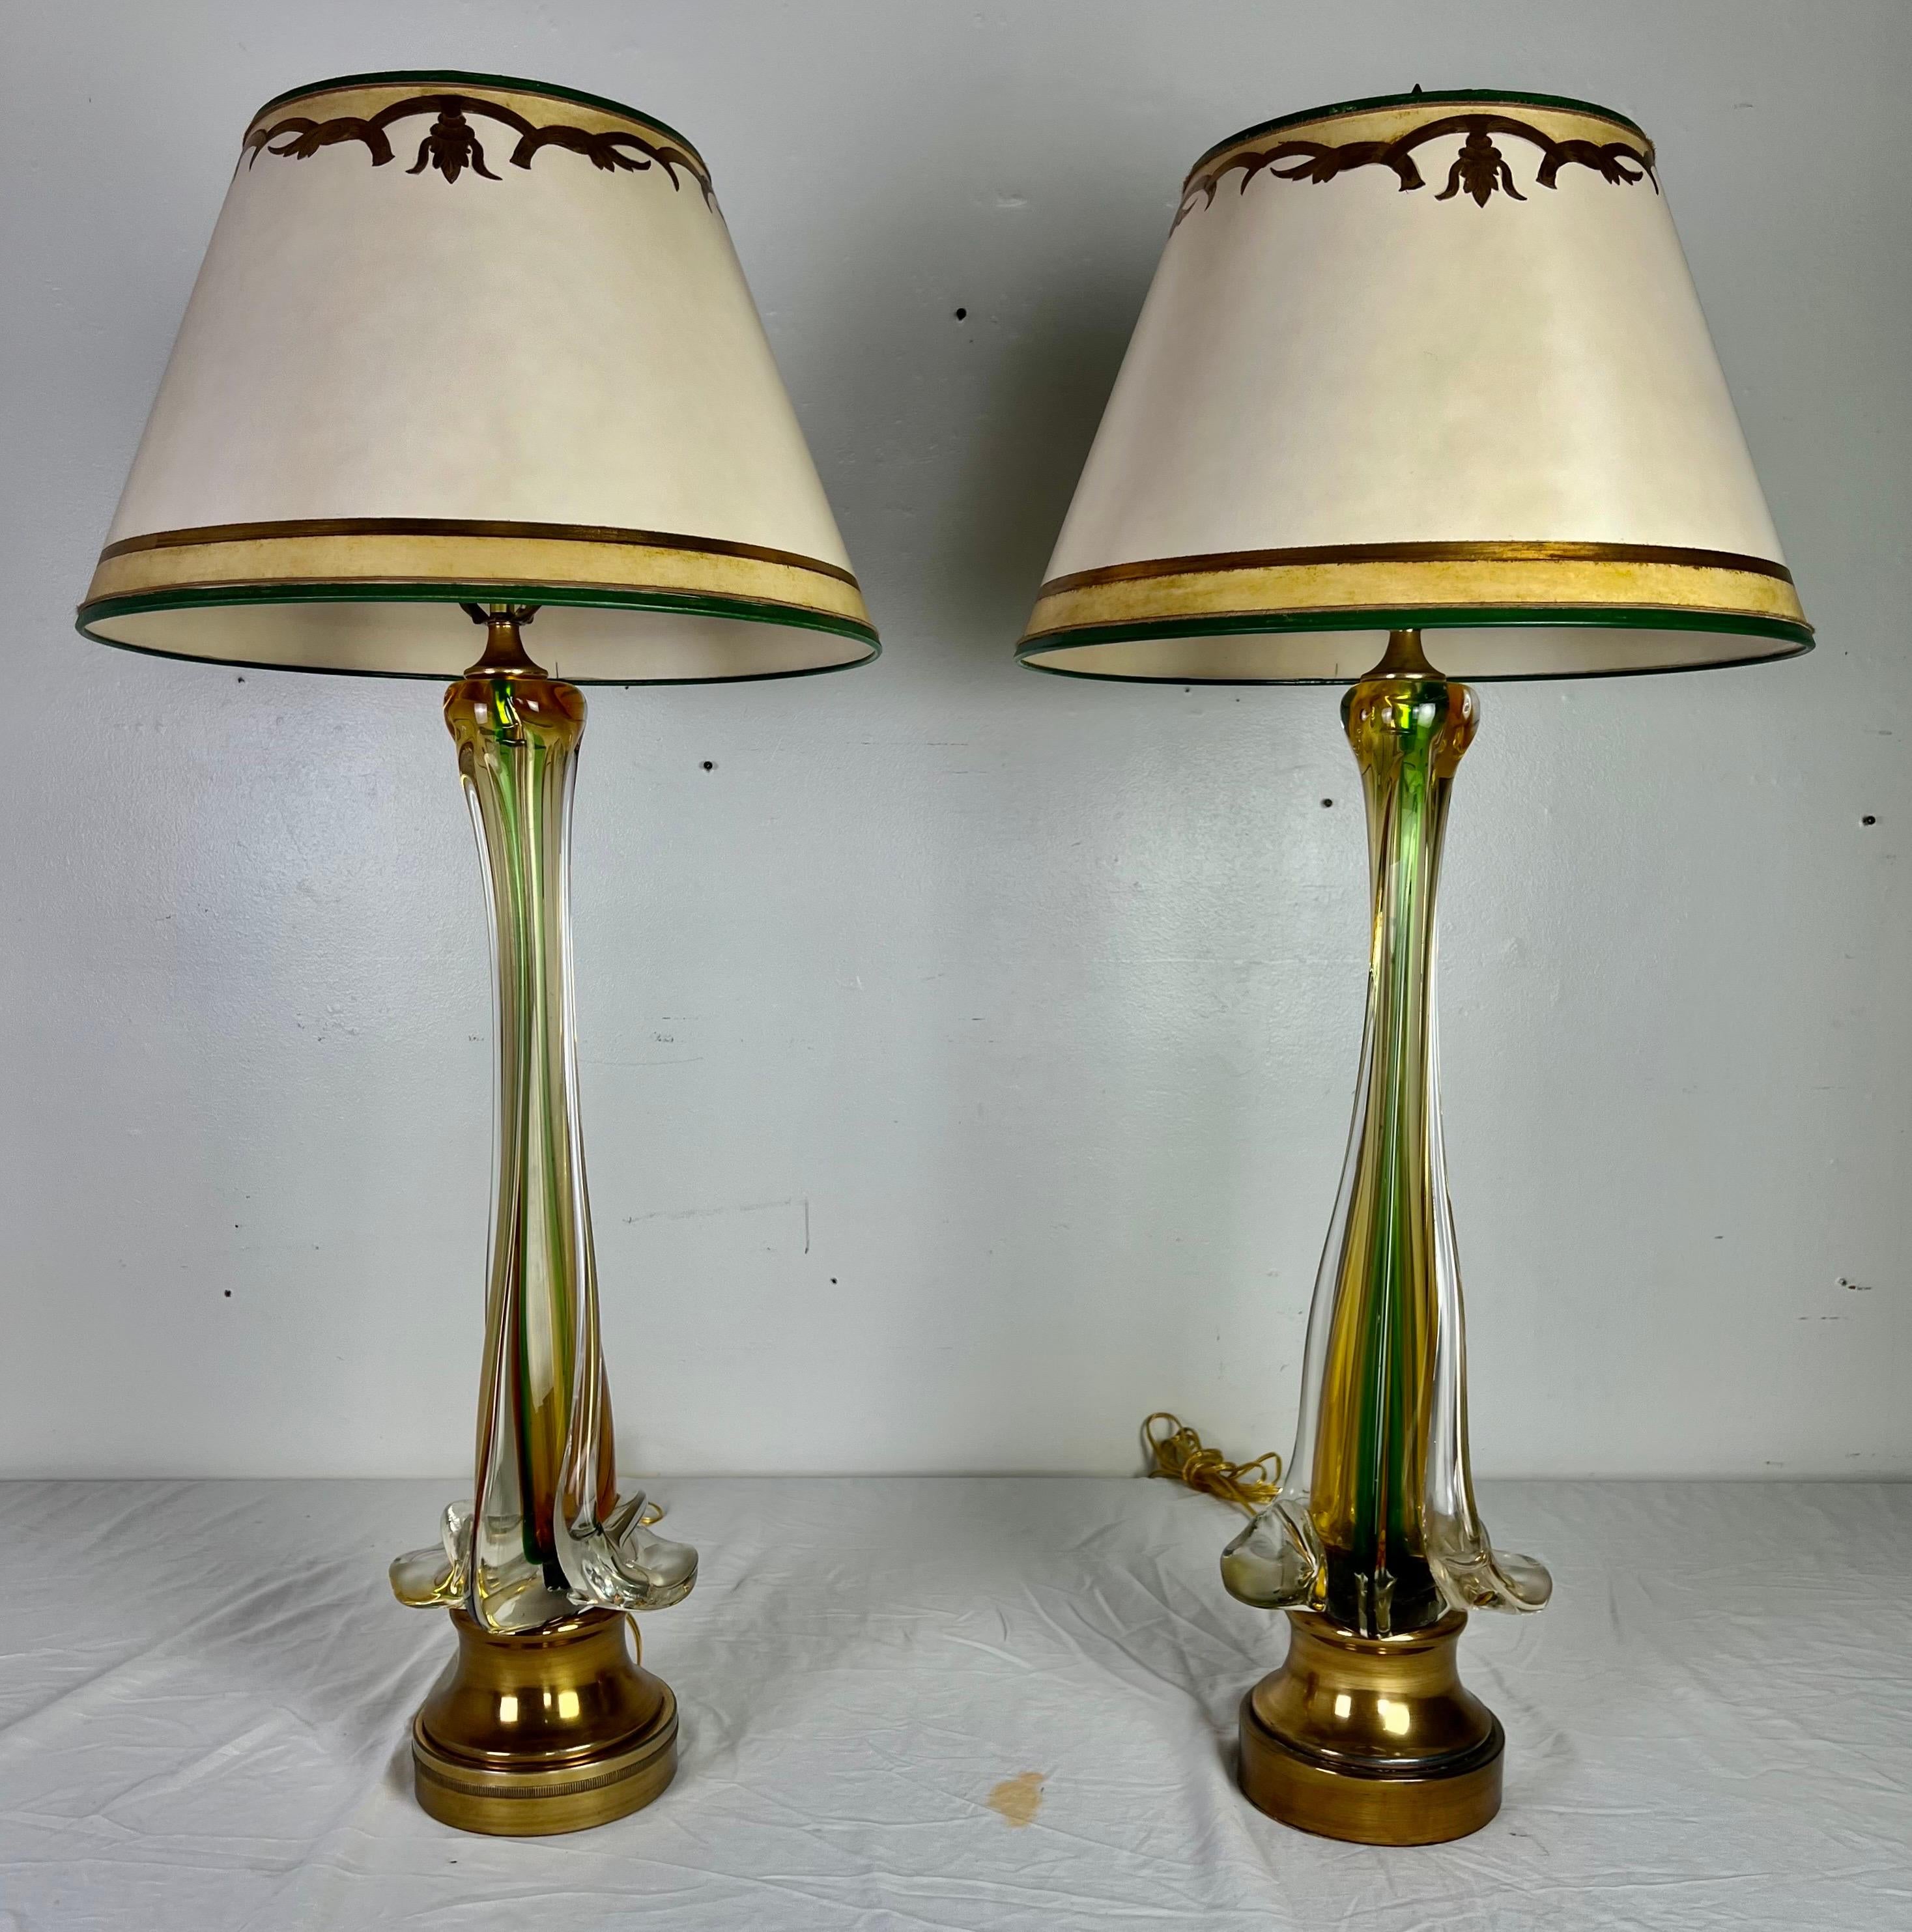 20th Century Italian Art Glass Lamps with Parchment Shades, Pair For Sale 3